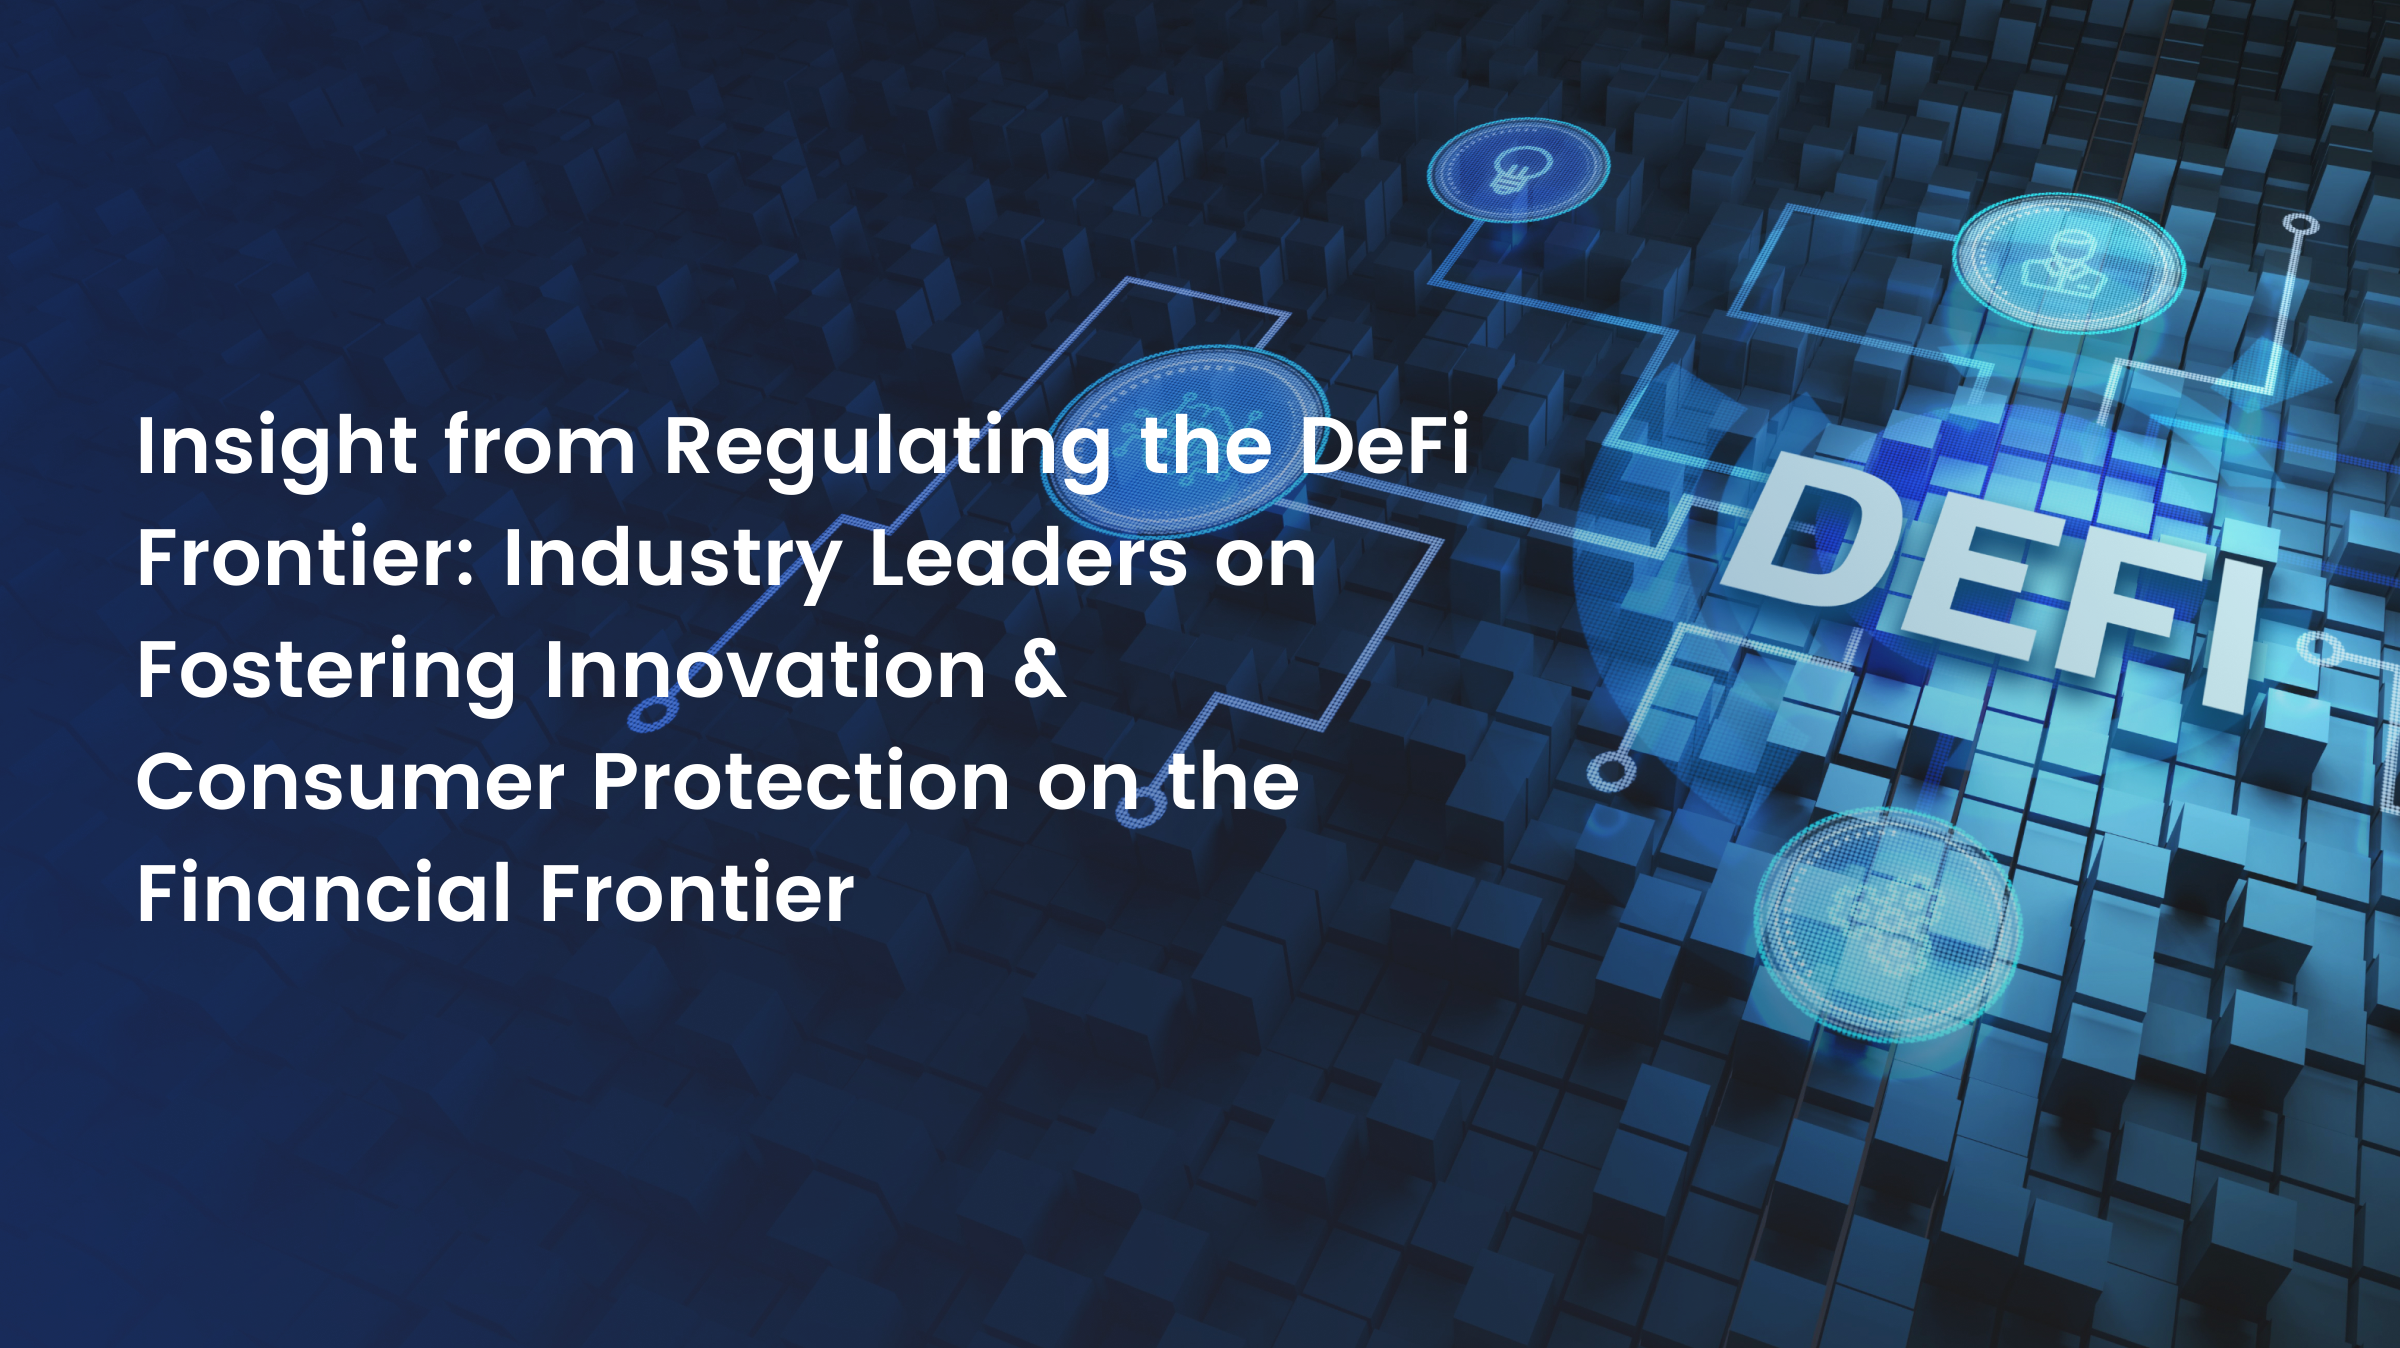 5 Key Takeaways from Regulating the DeFi Frontier: Industry Leaders Discuss Fostering Innovation & Consumer Protection on the Financial Frontier